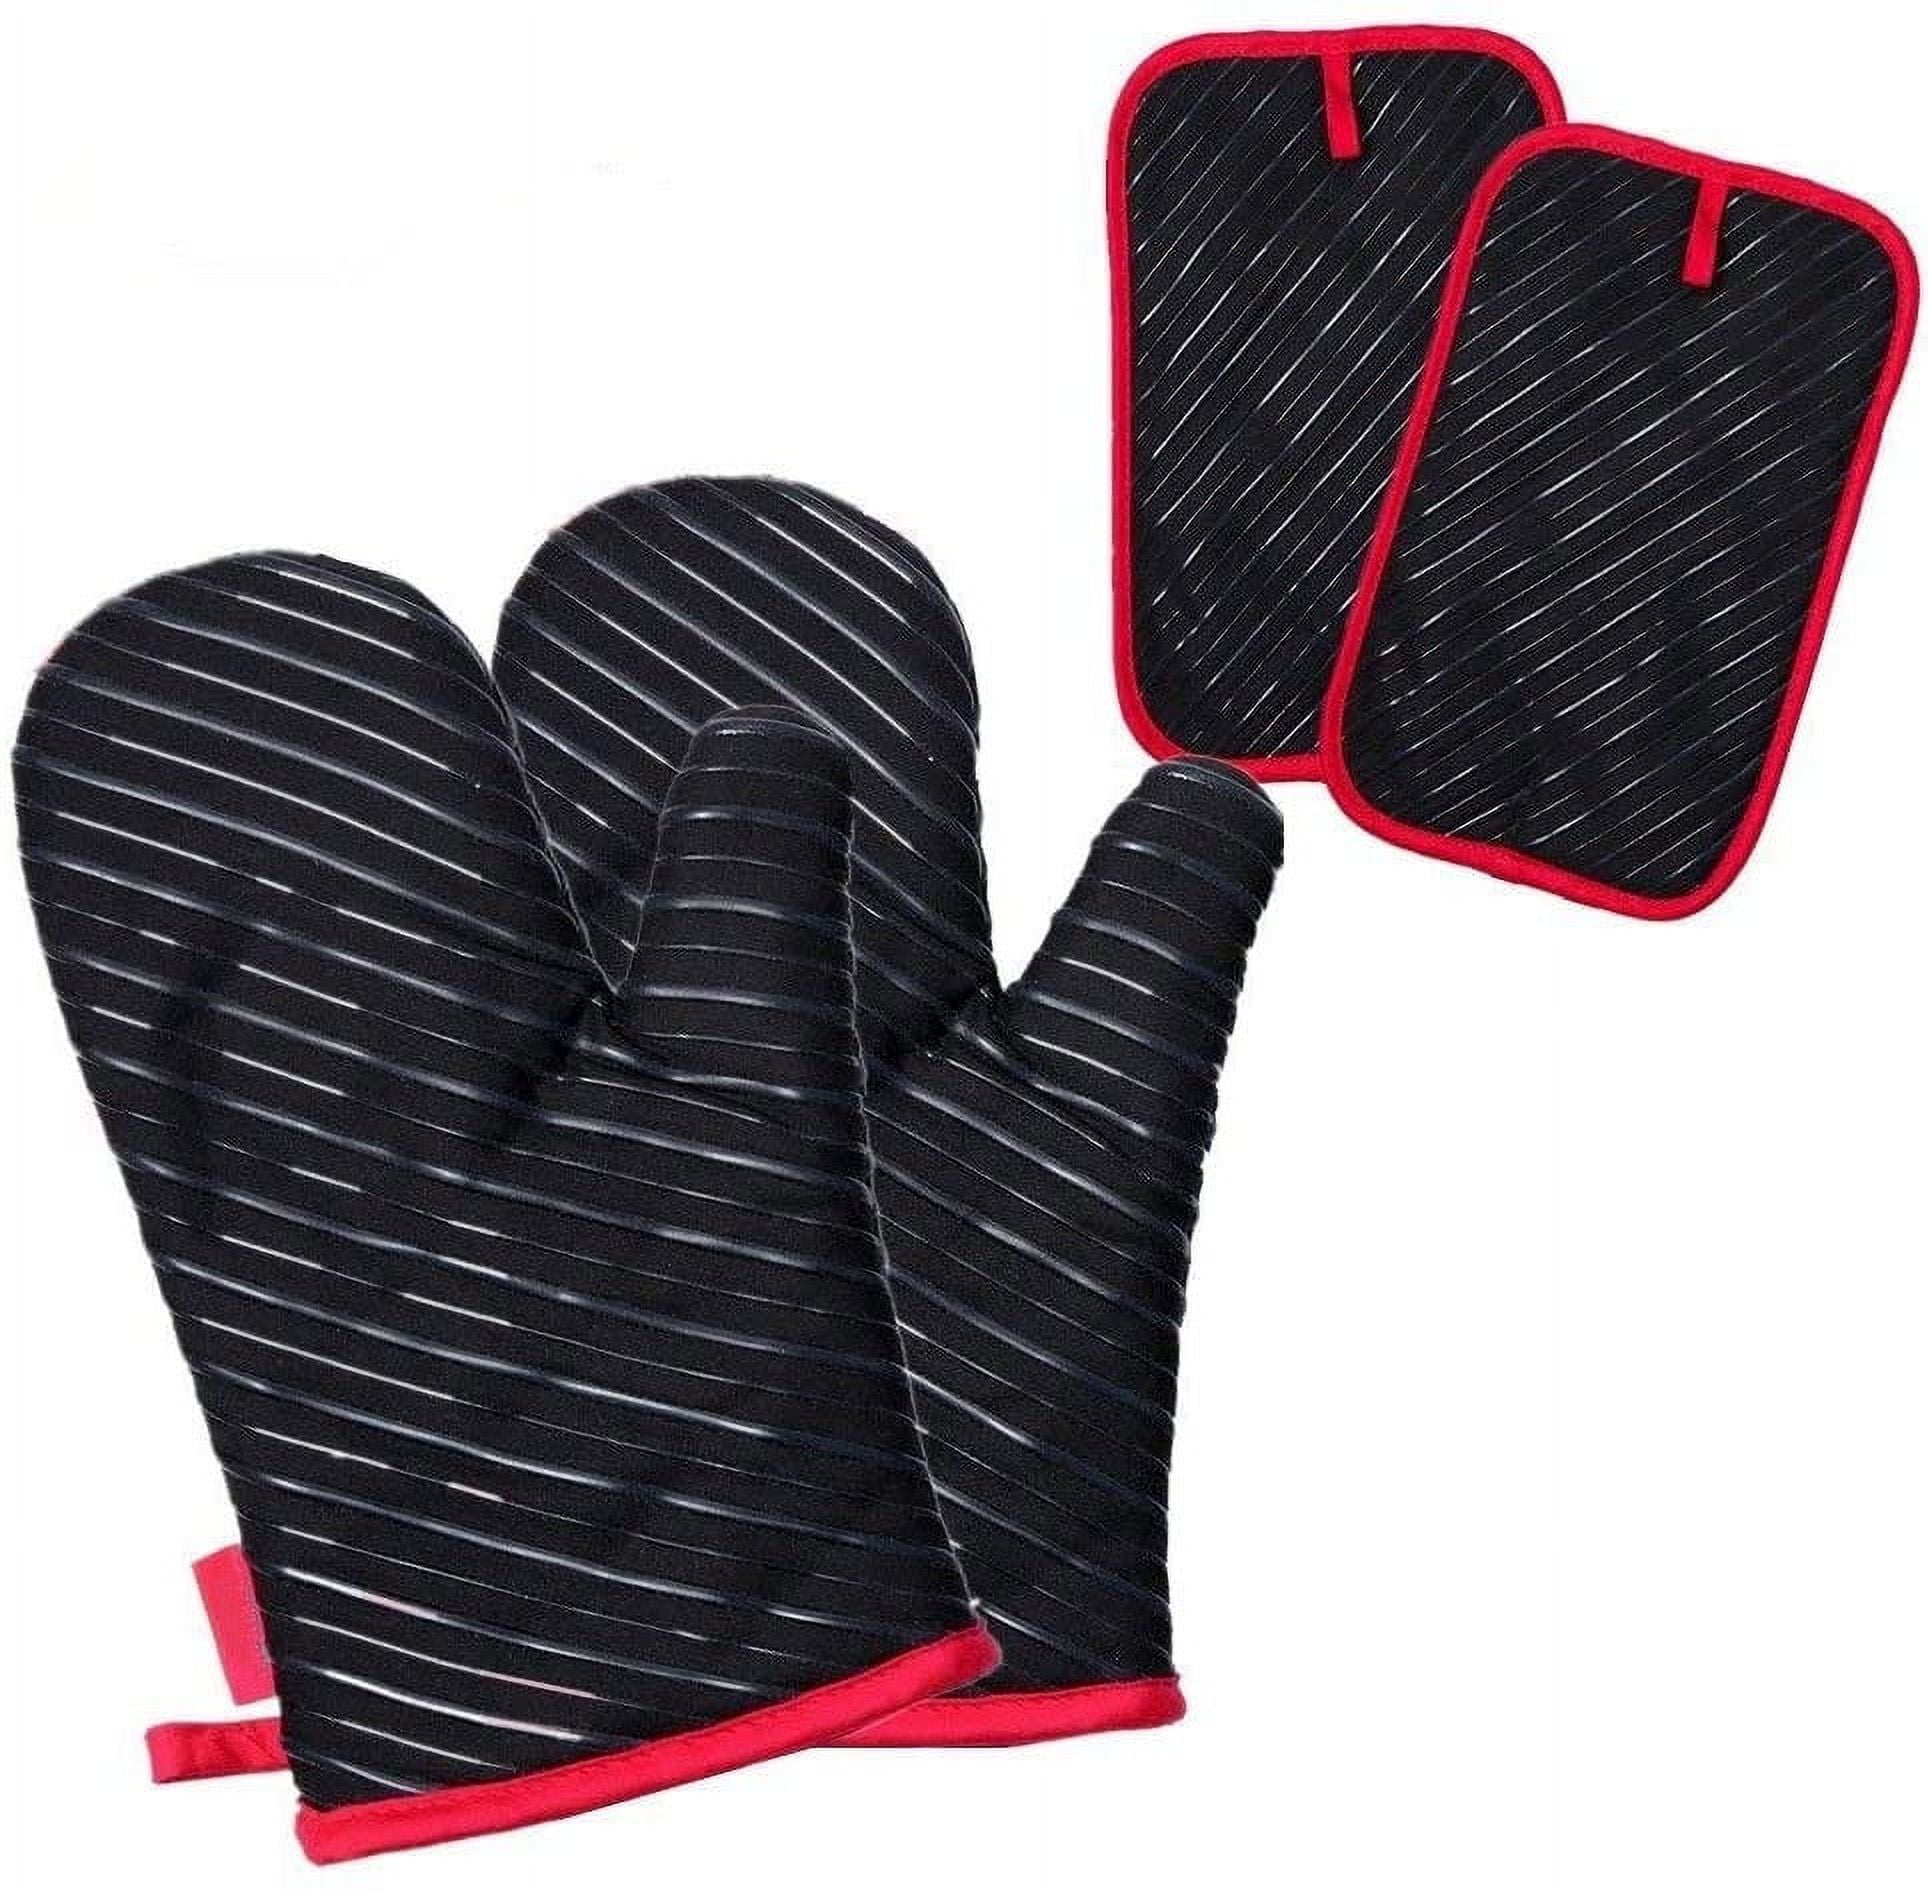 BESTONZON 4PCS Heat Resistant Oven Mitts and Pot Holders, Soft Cotton  Lining with Non-Slip Surface for Safe BBQ Cooking Baking Grilling (Black)